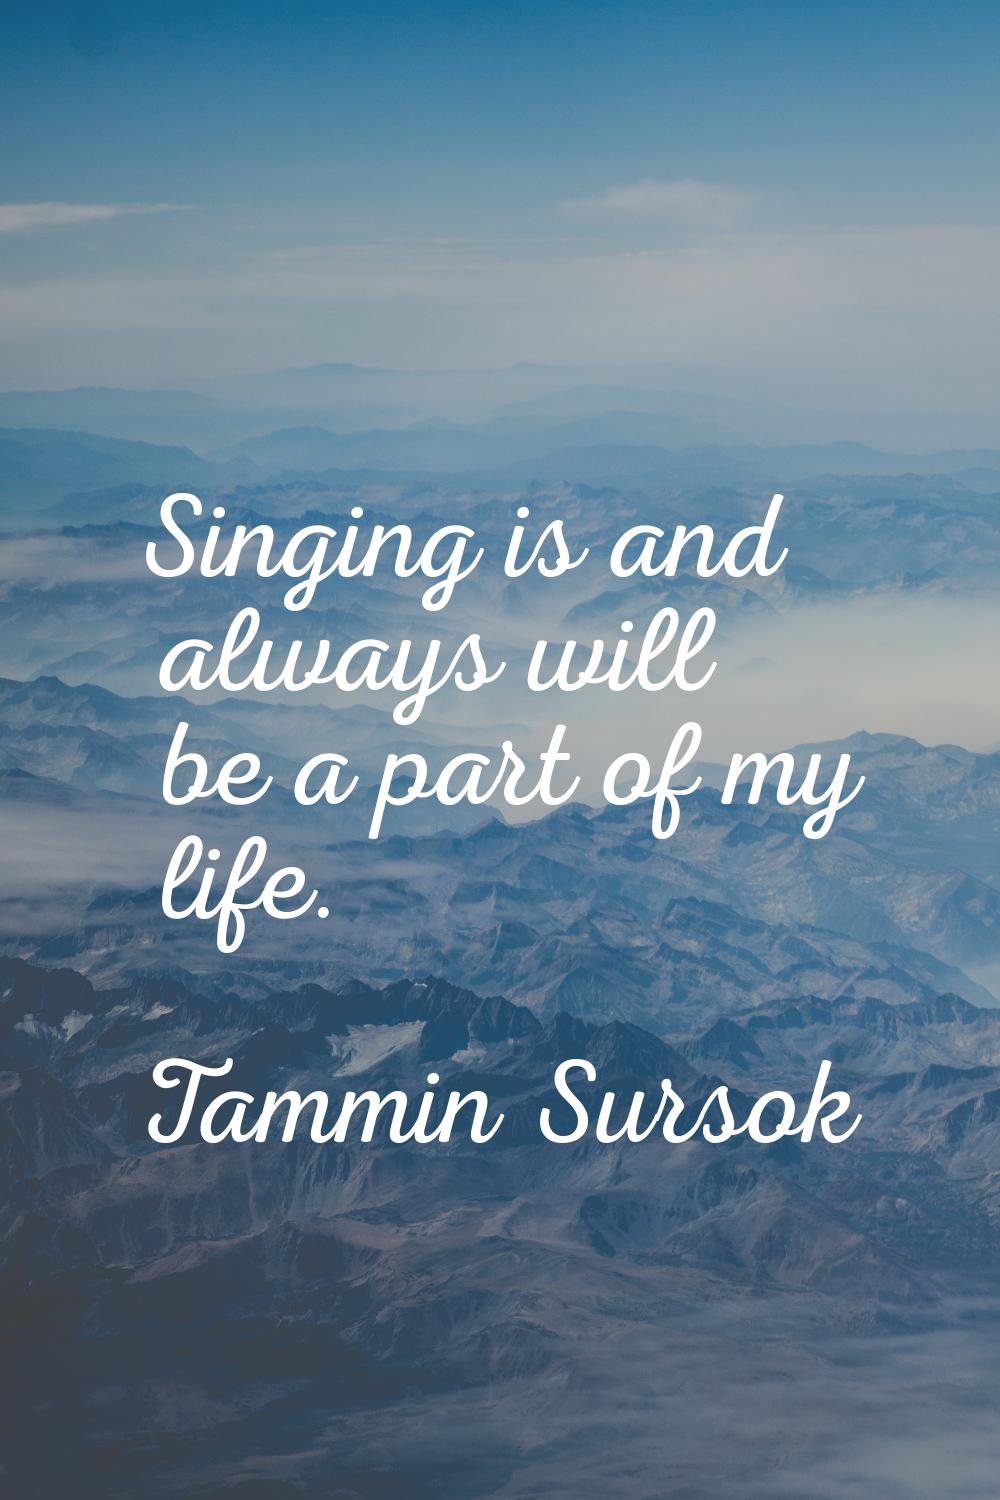 Singing is and always will be a part of my life.